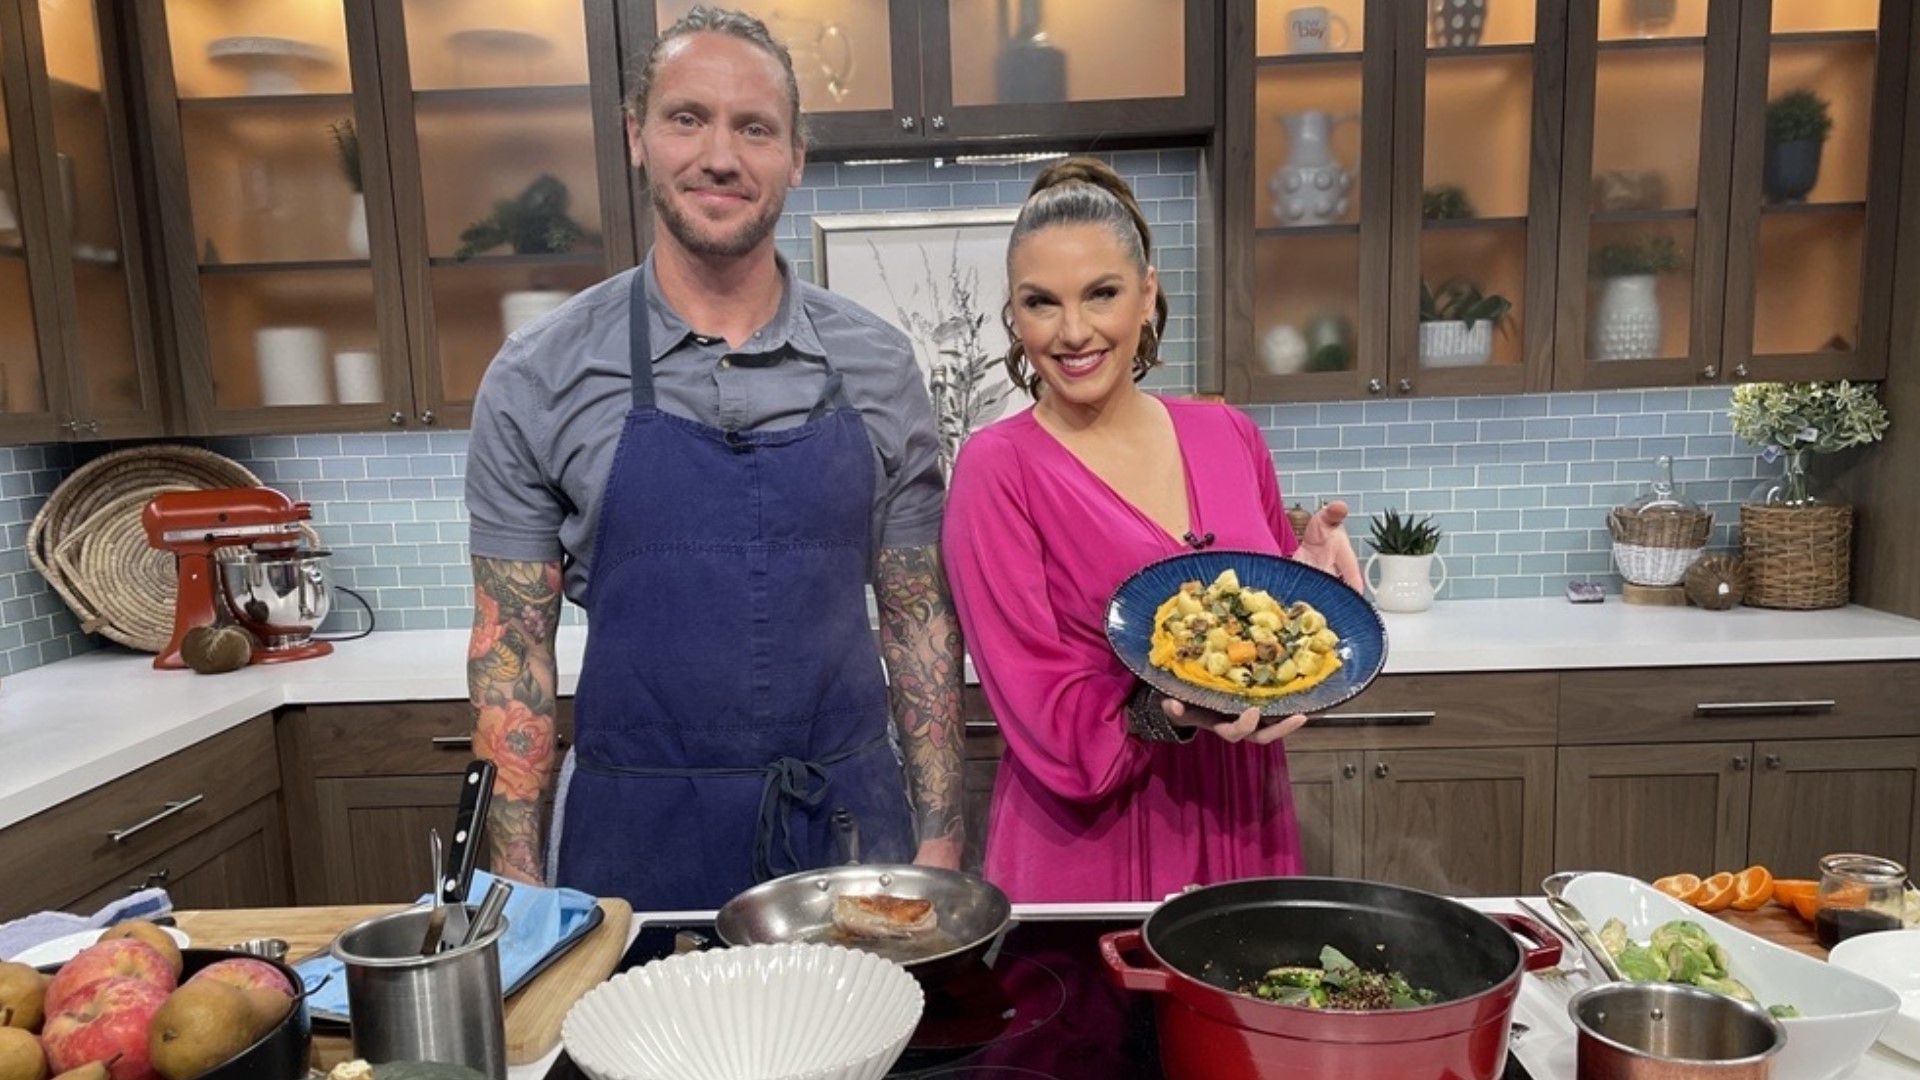 Kevin Benner, executive chef at Cedar and Elm, located at The Lodge at St. Edward Park, shows Amity his quick but elegant fall recipe. #newdaynw